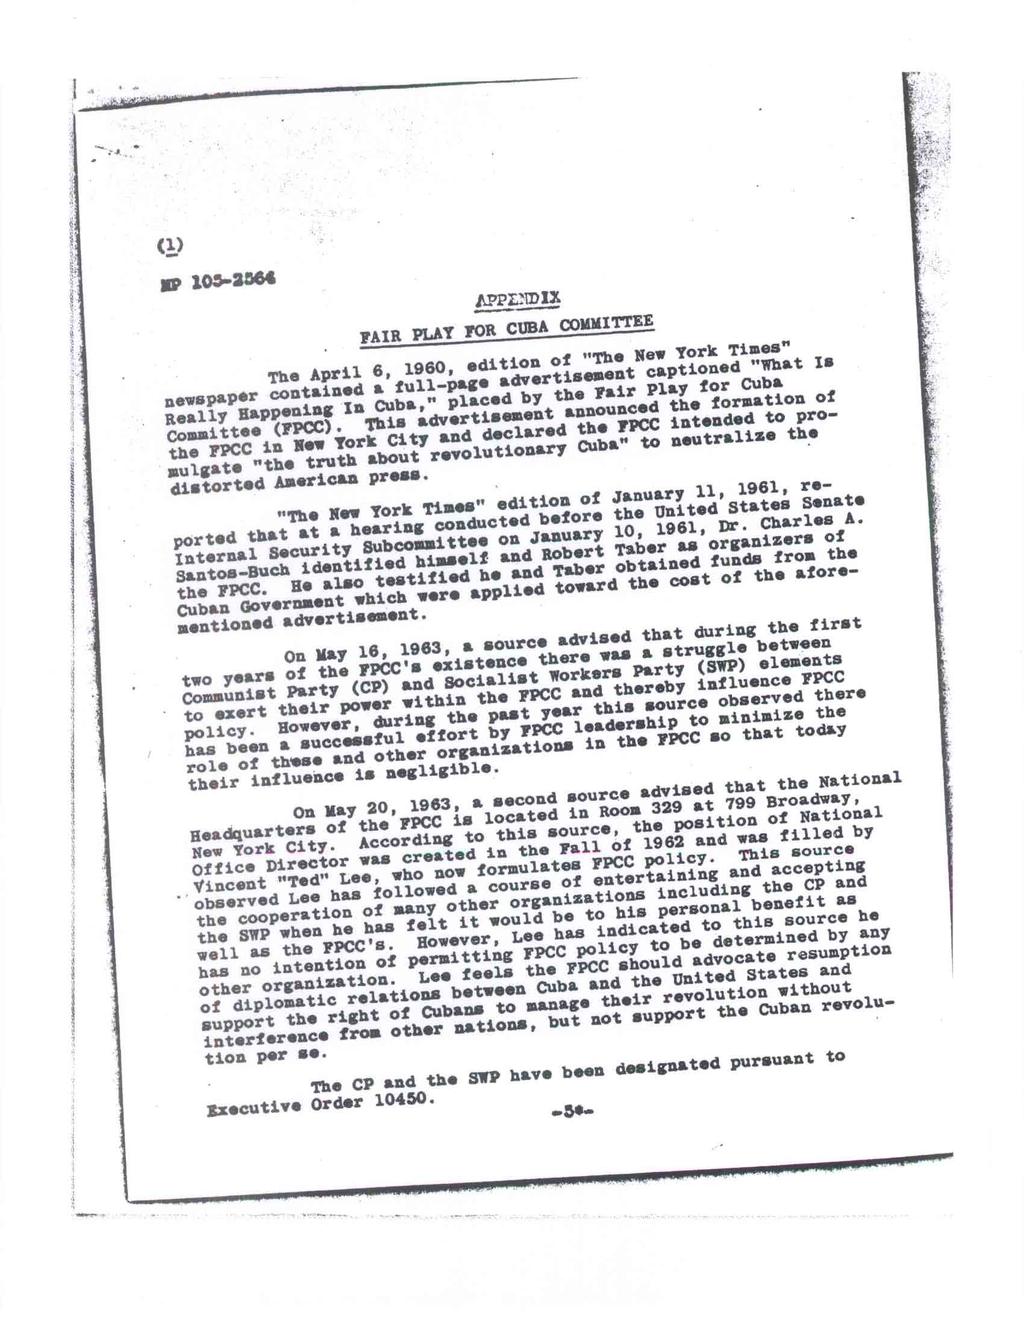 (1) UP 103-2364 APPLNDIX FAIR PLAY FOR CUBA COMMITTEE The April 6, 1960, edition of "The New York Times" newspaper contained a full-page advertisement captioned "What Is Really Happening In Cuba,"